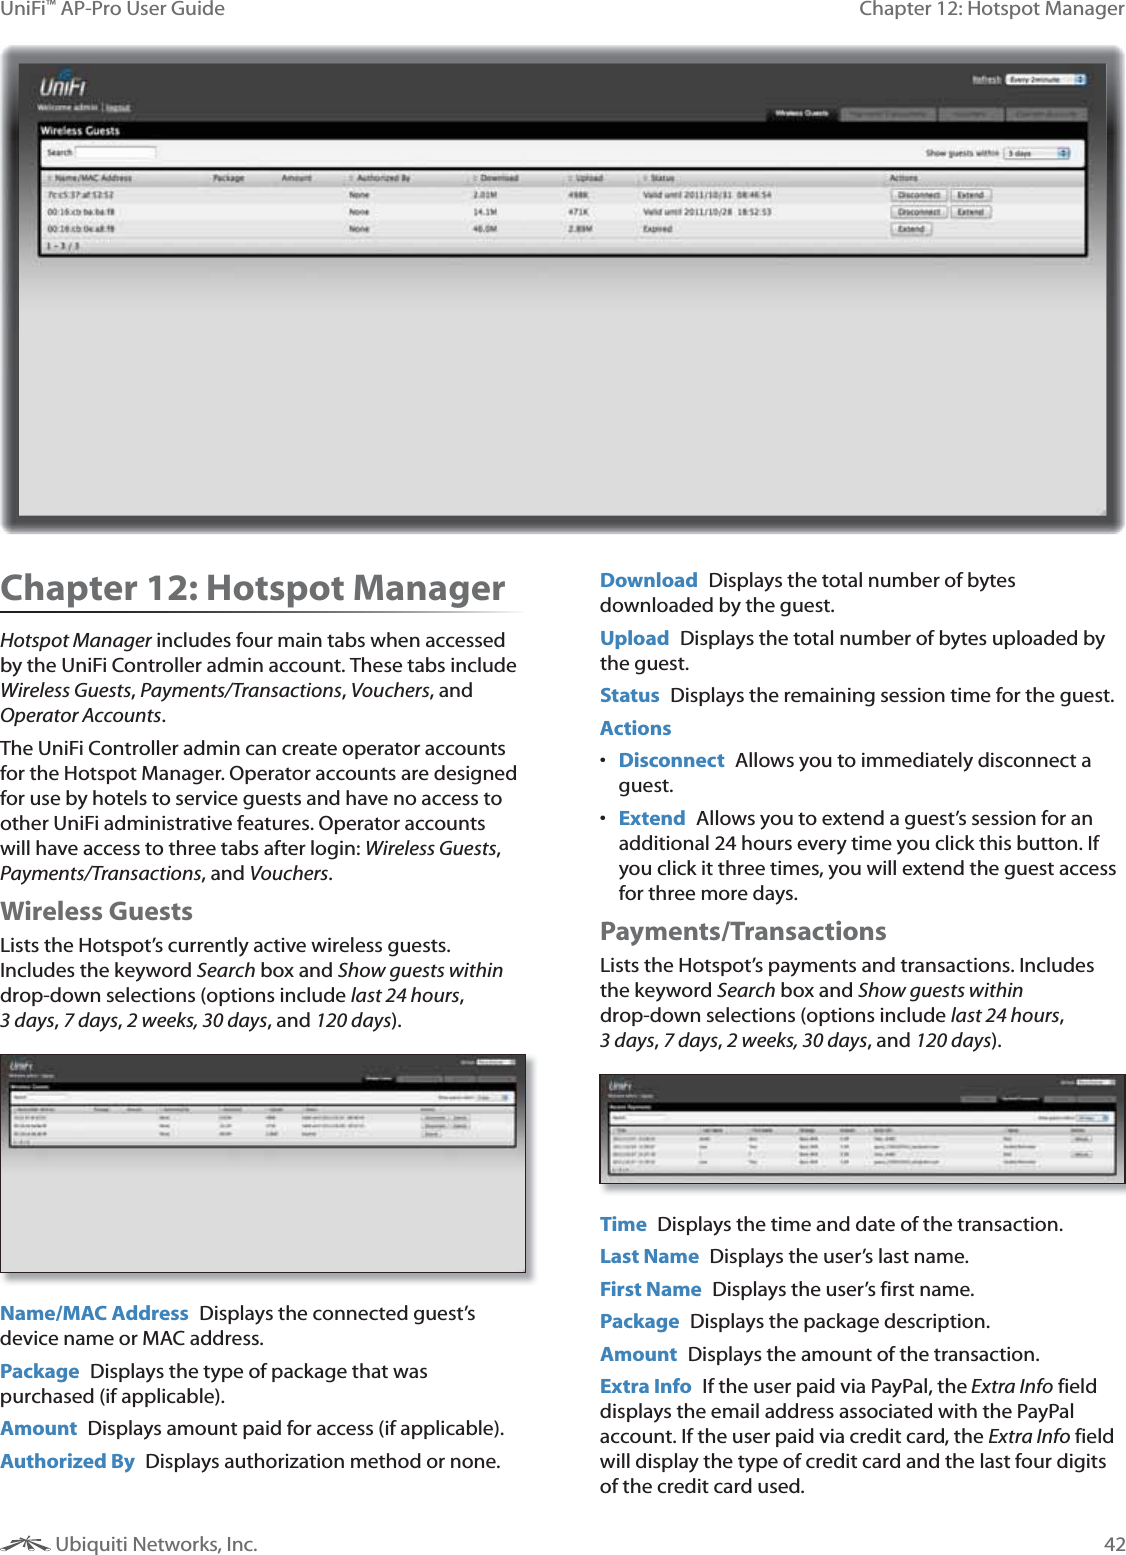 42Chapter 12: Hotspot ManagerUniFi™ AP-Pro User Guide Ubiquiti Networks, Inc.Chapter 12: Hotspot ManagerHotspot Manager includes four main tabs when accessed by the UniFi Controller admin account. These tabs include Wireless Guests, Payments/Transactions, Vouchers, and Operator Accounts.The UniFi Controller admin can create operator accounts for the Hotspot Manager. Operator accounts are designed for use by hotels to service guests and have no access to other UniFi administrative features. Operator accounts will have access to three tabs after login: Wireless Guests, Payments/Transactions, and Vouchers.Wireless GuestsLists the Hotspot’s currently active wireless guests. Includes the keyword Search box and Show guests within drop-down selections (options include last 24 hours, J&lt;, Q&lt;, Y+ZJ[&lt;, and !Y[&lt;). Name/MAC Address  Displays the connected guest’s device name or MAC address.Package  Displays the type of package that was purchased (if applicable). Amount  Displays amount paid for access (if applicable).Authorized By  Displays authorization method or none.Download  Displays the total number of bytes downloaded by the guest.Upload  Displays the total number of bytes uploaded by the guest.Status  Displays the remaining session time for the guest.Actions Disconnect  Allows you to immediately disconnect a guest. Extend  Allows you to extend a guest’s session for an additional 24 hours every time you click this button. If you click it three times, you will extend the guest access for three more days.Payments/Transactions Lists the Hotspot’s payments and transactions. Includes the keyword Search box and Show guests within drop-down selections (options include last 24 hours, J&lt;, Q&lt;, Y+ZJ[&lt;, and !Y[&lt;).Time  Displays the time and date of the transaction.Last Name  Displays the user’s last name.First Name  Displays the user’s first name.Package  Displays the package description.Amount  Displays the amount of the transaction.Extra Info  If the user paid via PayPal, the Extra Info field displays the email address associated with the PayPal account. If the user paid via credit card, the Extra Info field will display the type of credit card and the last four digits of the credit card used. 